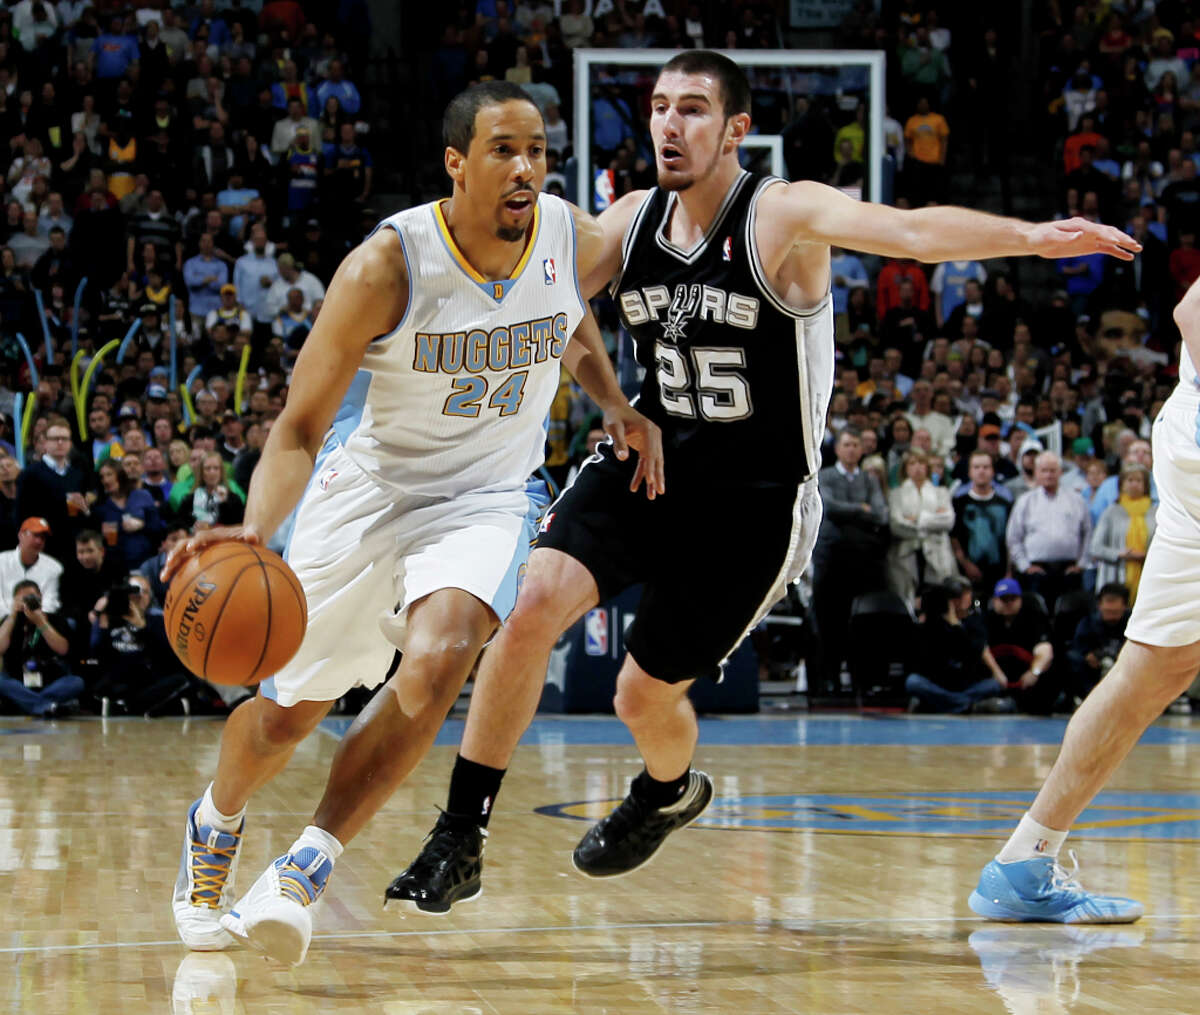 Denver Nuggets guard Andre Miller, left, drives past San Antonio Spurs guard Nando De Colo, of France, in the first quarter of an NBA basketball game in Denver, Wednesday, April 10, 2013.